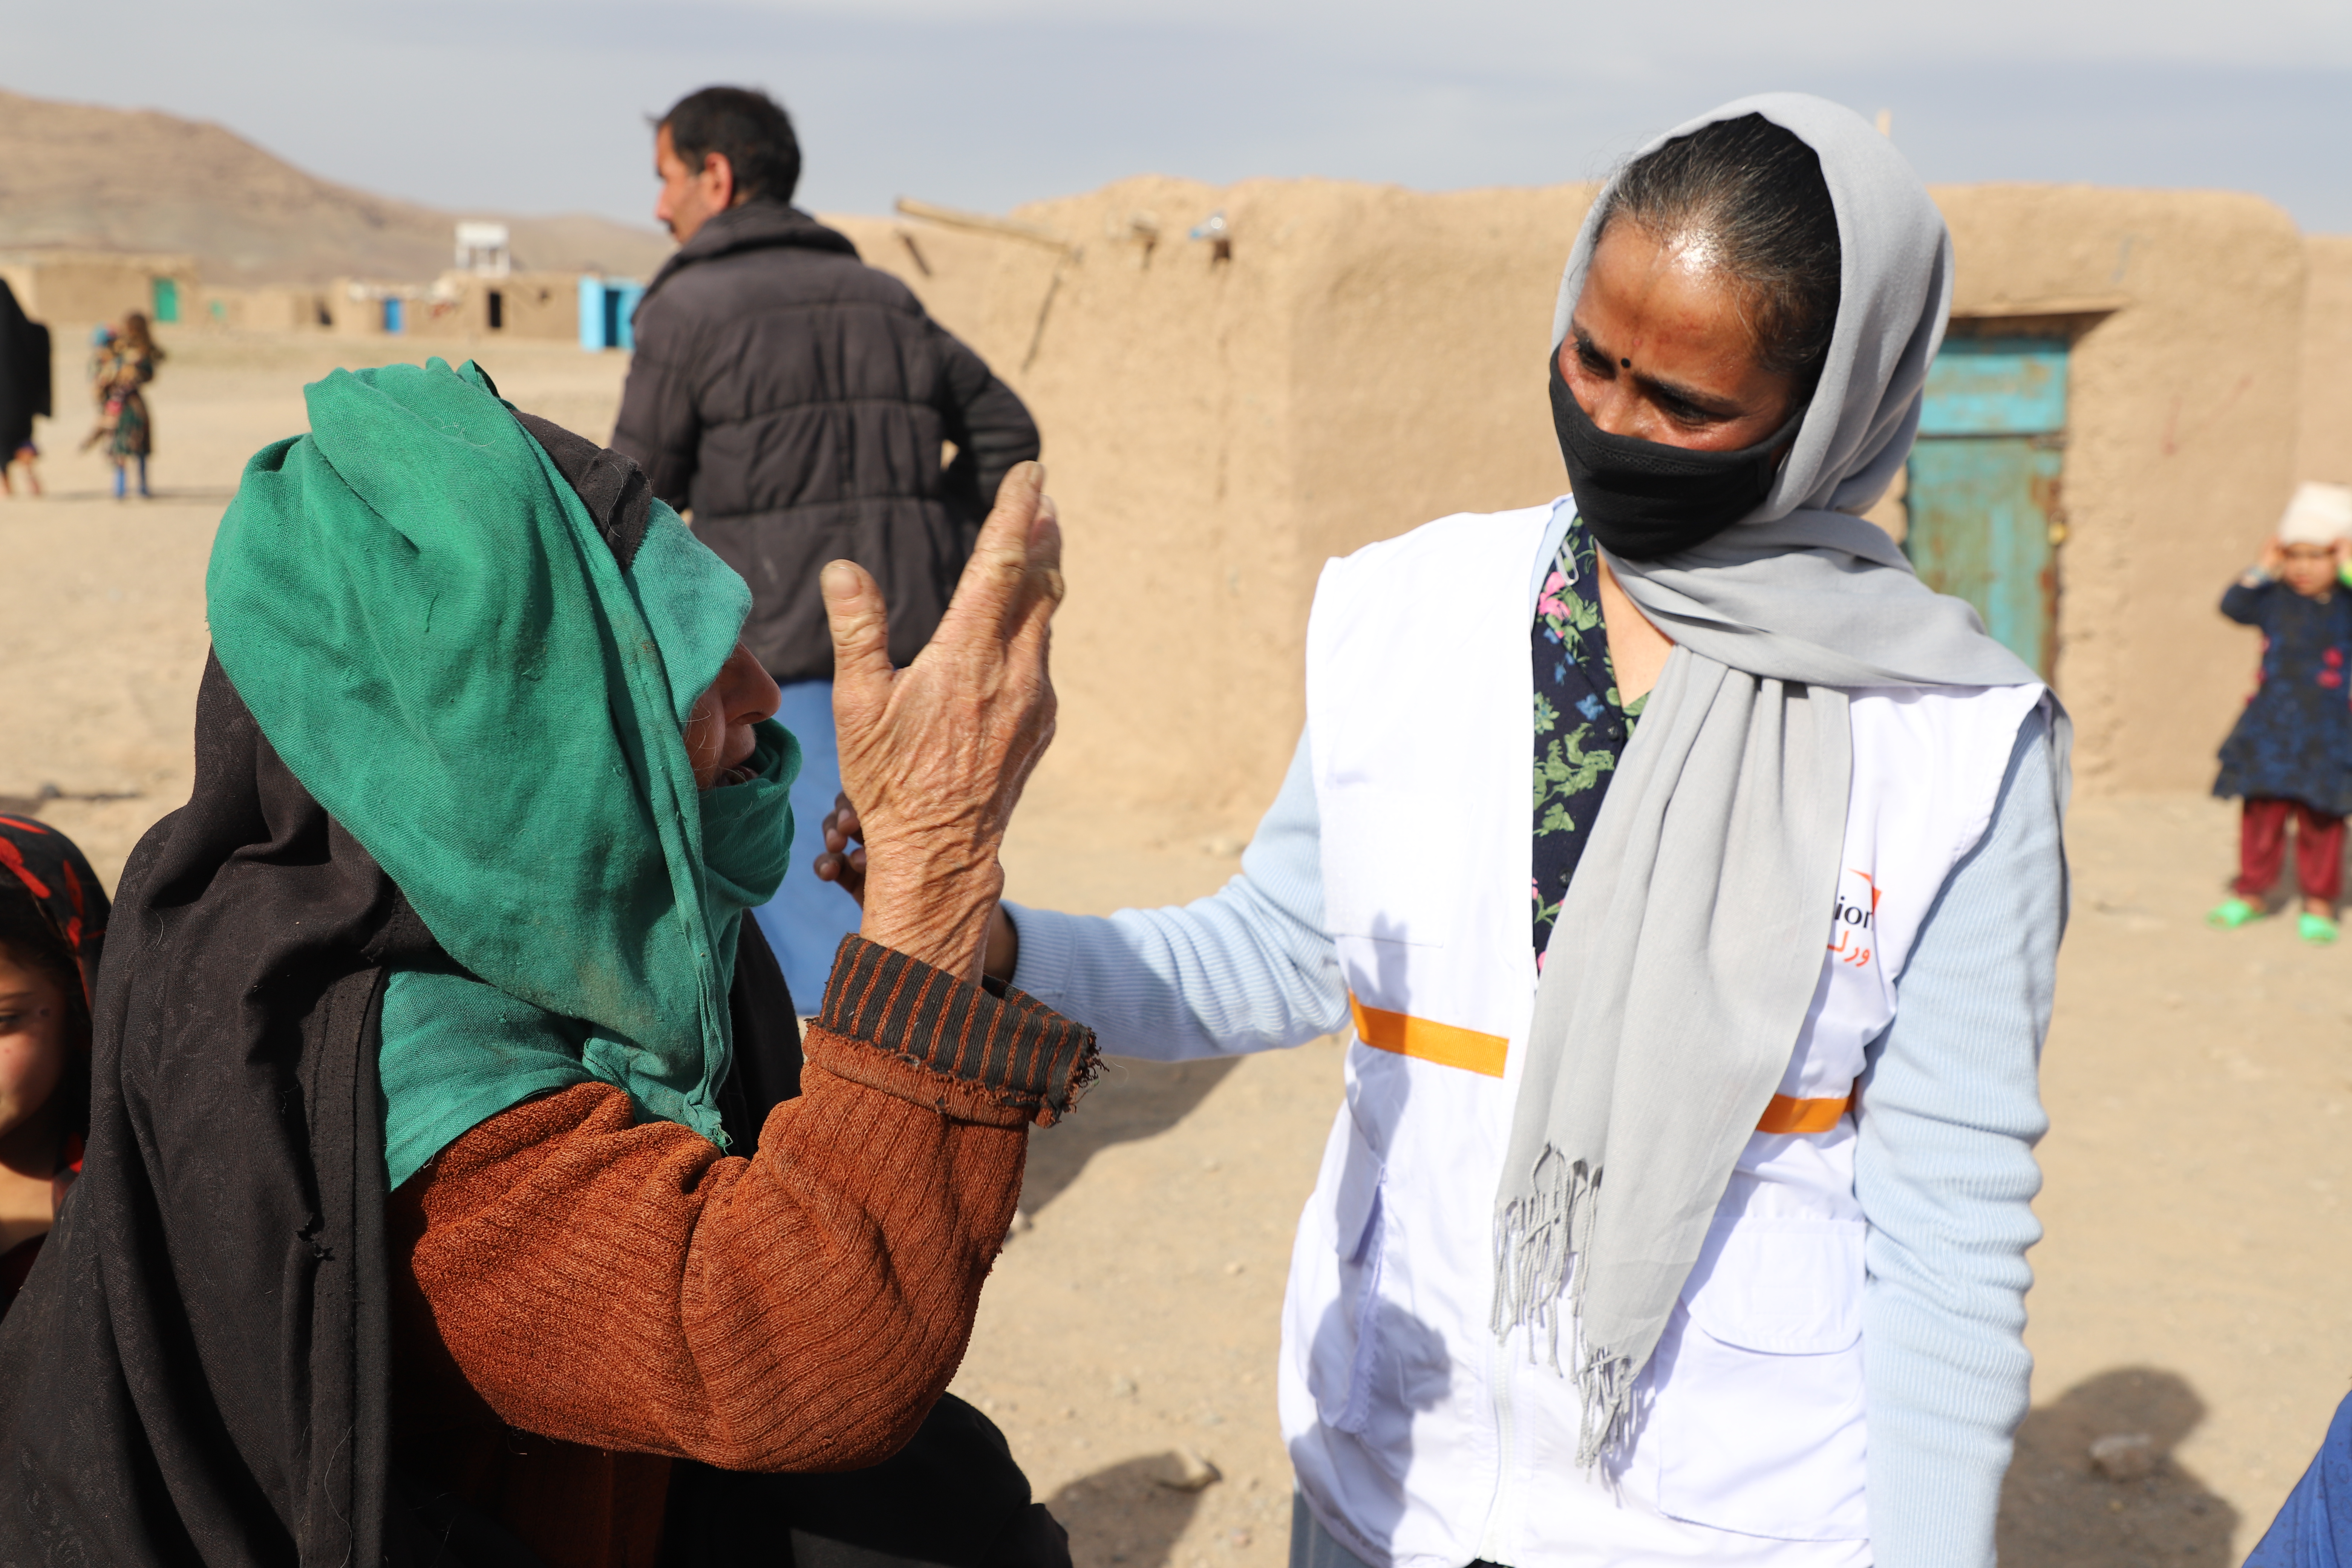 Asuntha Charles national director of World Vision's programmes in Afghanistan speaks with a woman